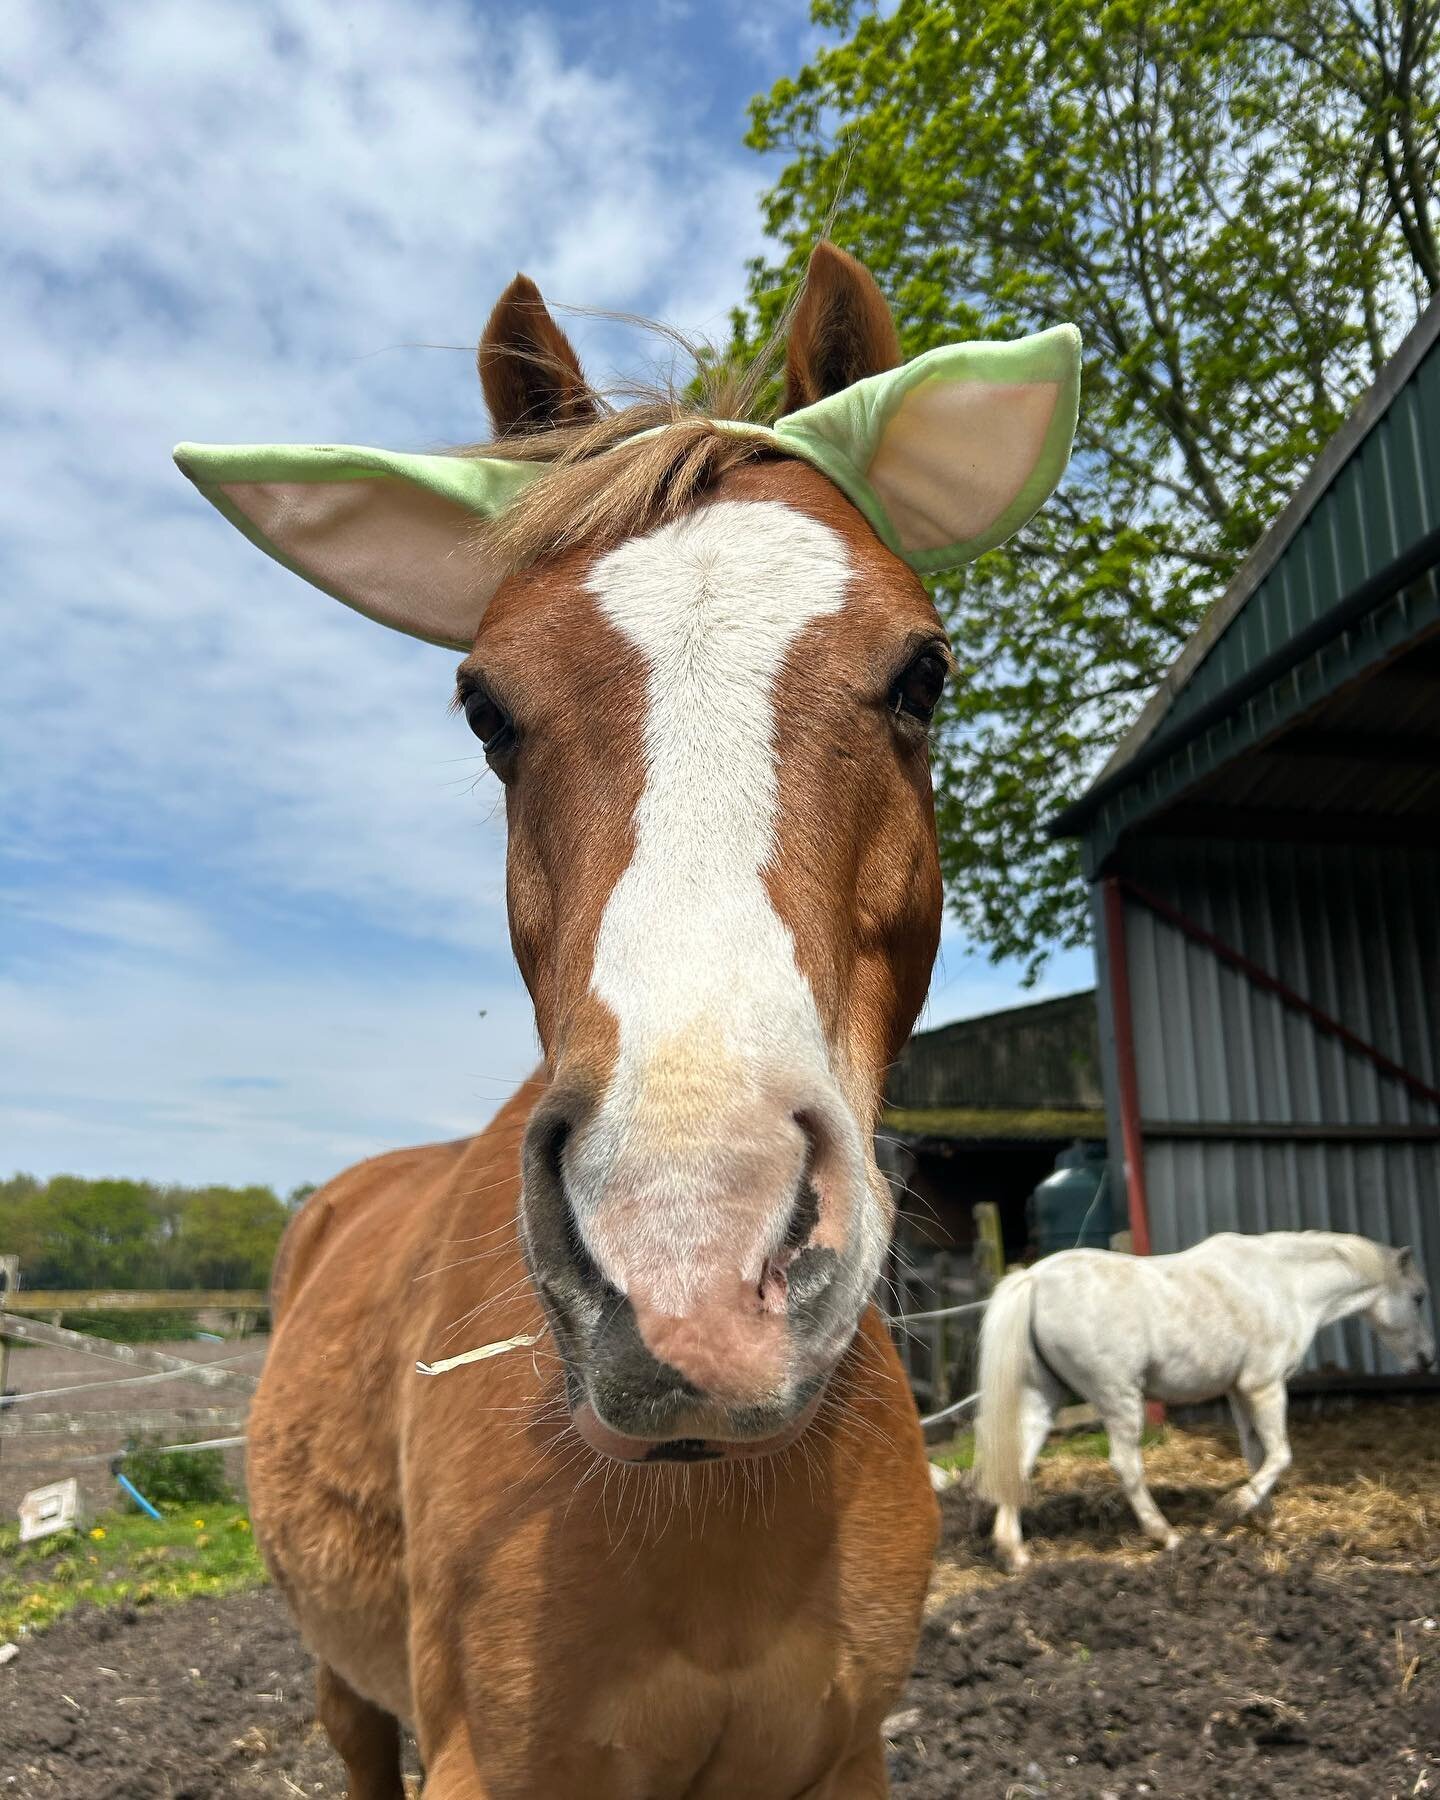 💫may the 4th be with you!💫 (but it gets progressively worse!) #starwarsday#starwars#horse#horses#pony#ponies#birtlesequestrian#horseriding#horsesofinstagram#ridingwithhorsemanship